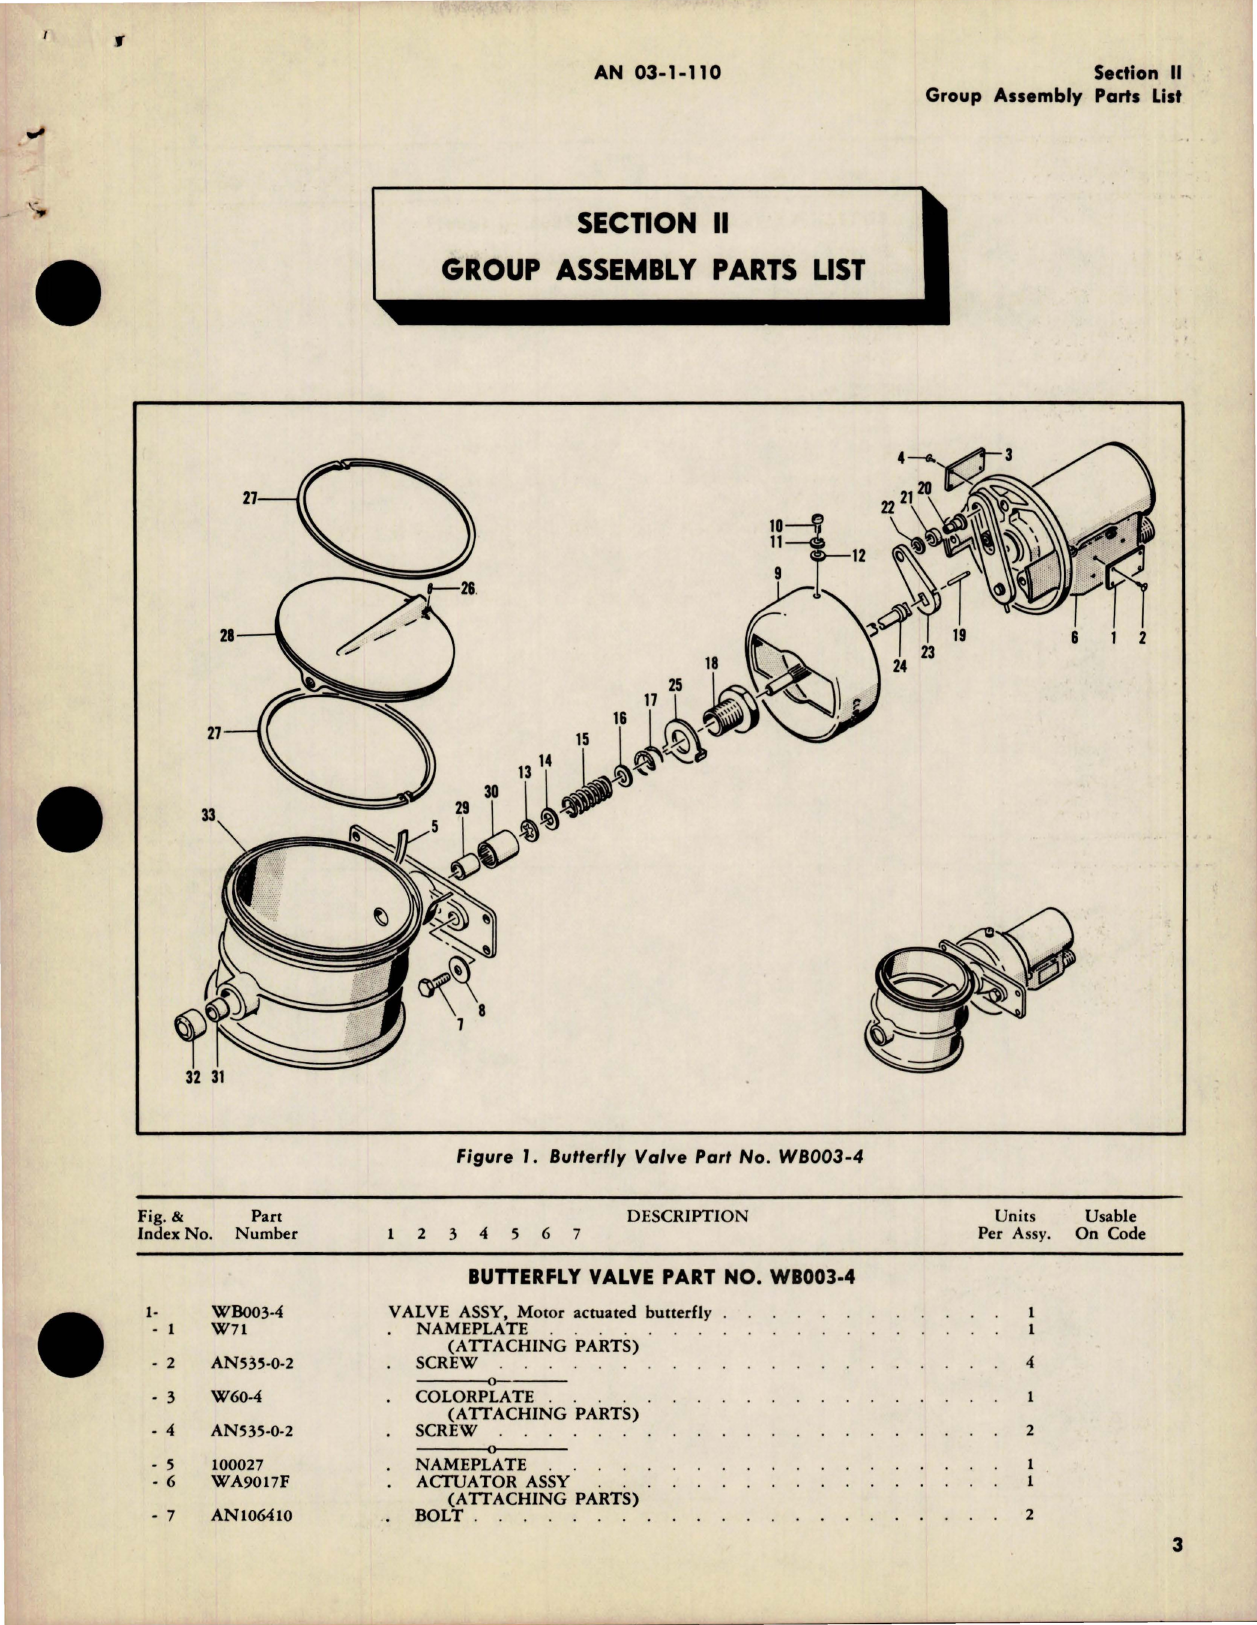 Sample page 7 from AirCorps Library document: Illustrated Parts Breakdown for Butterfly Valves